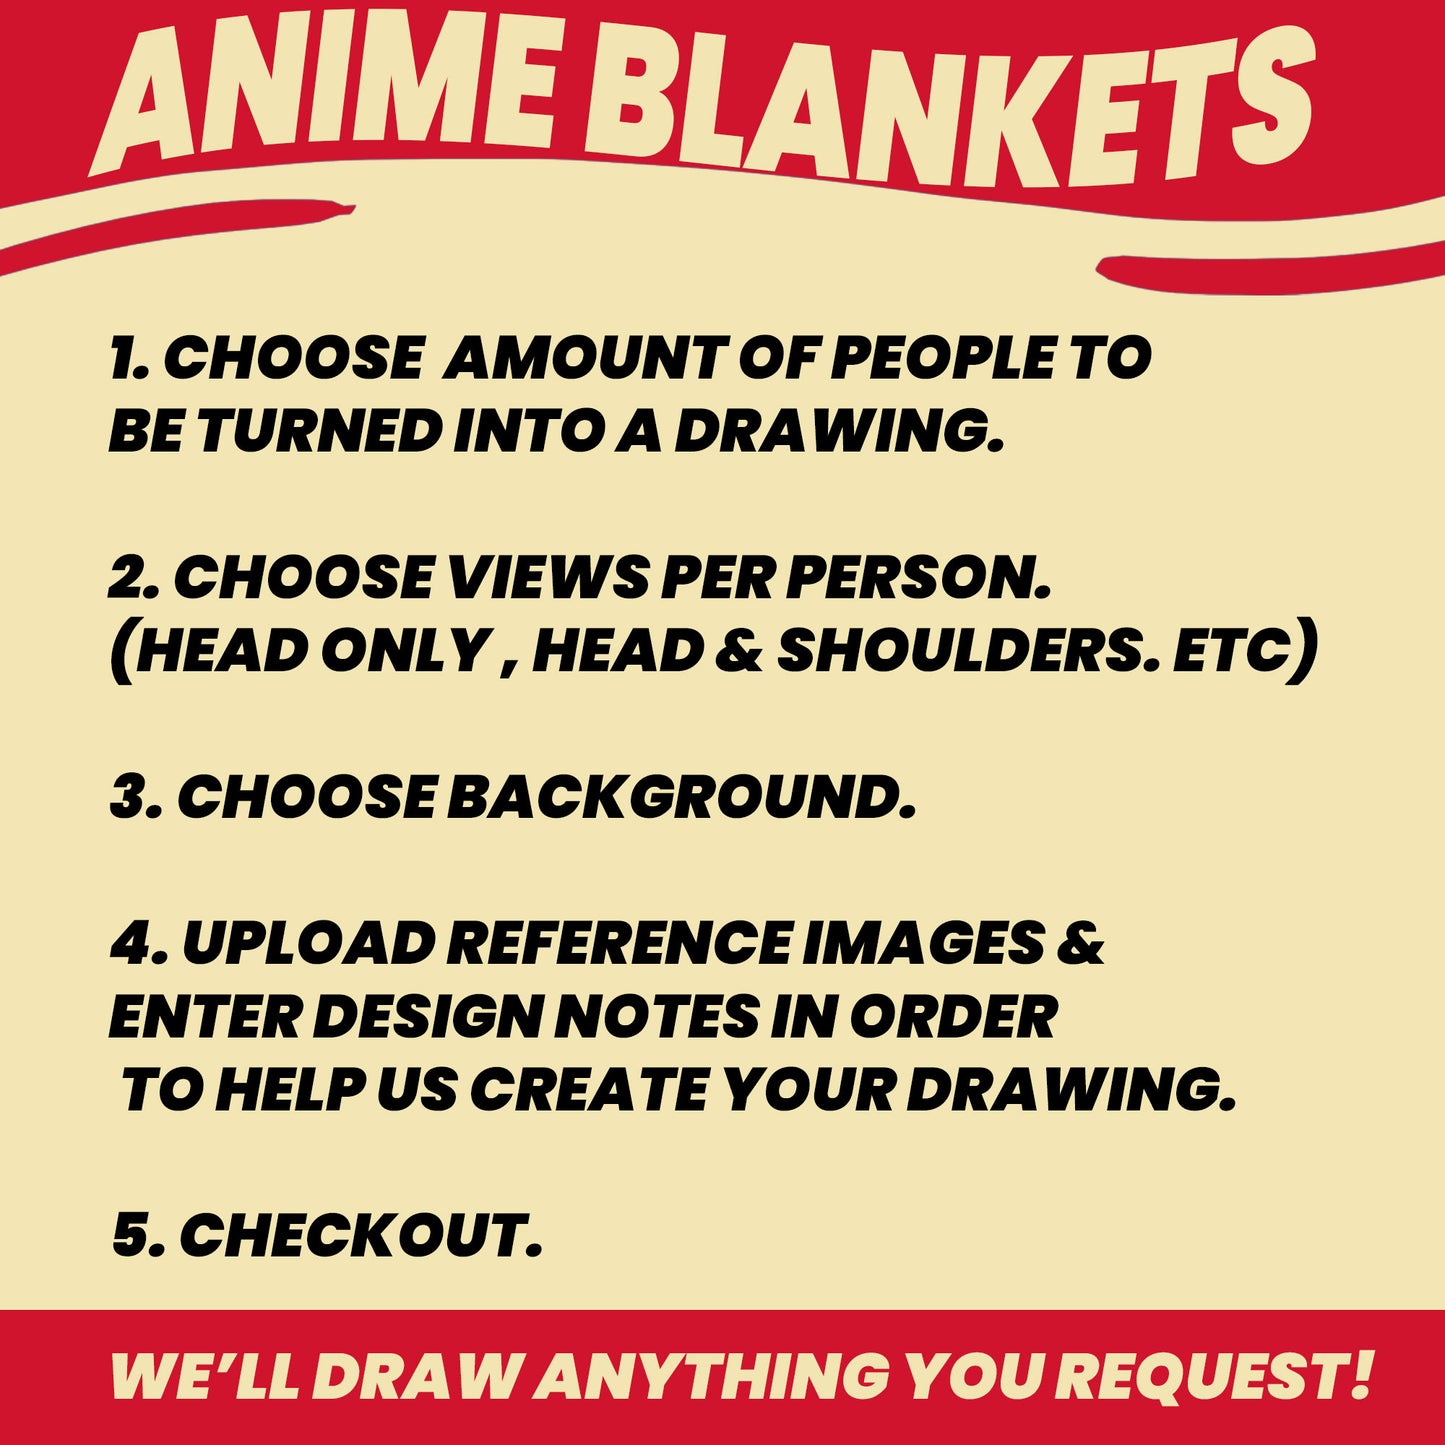 personalized blankets with photos turned to anime